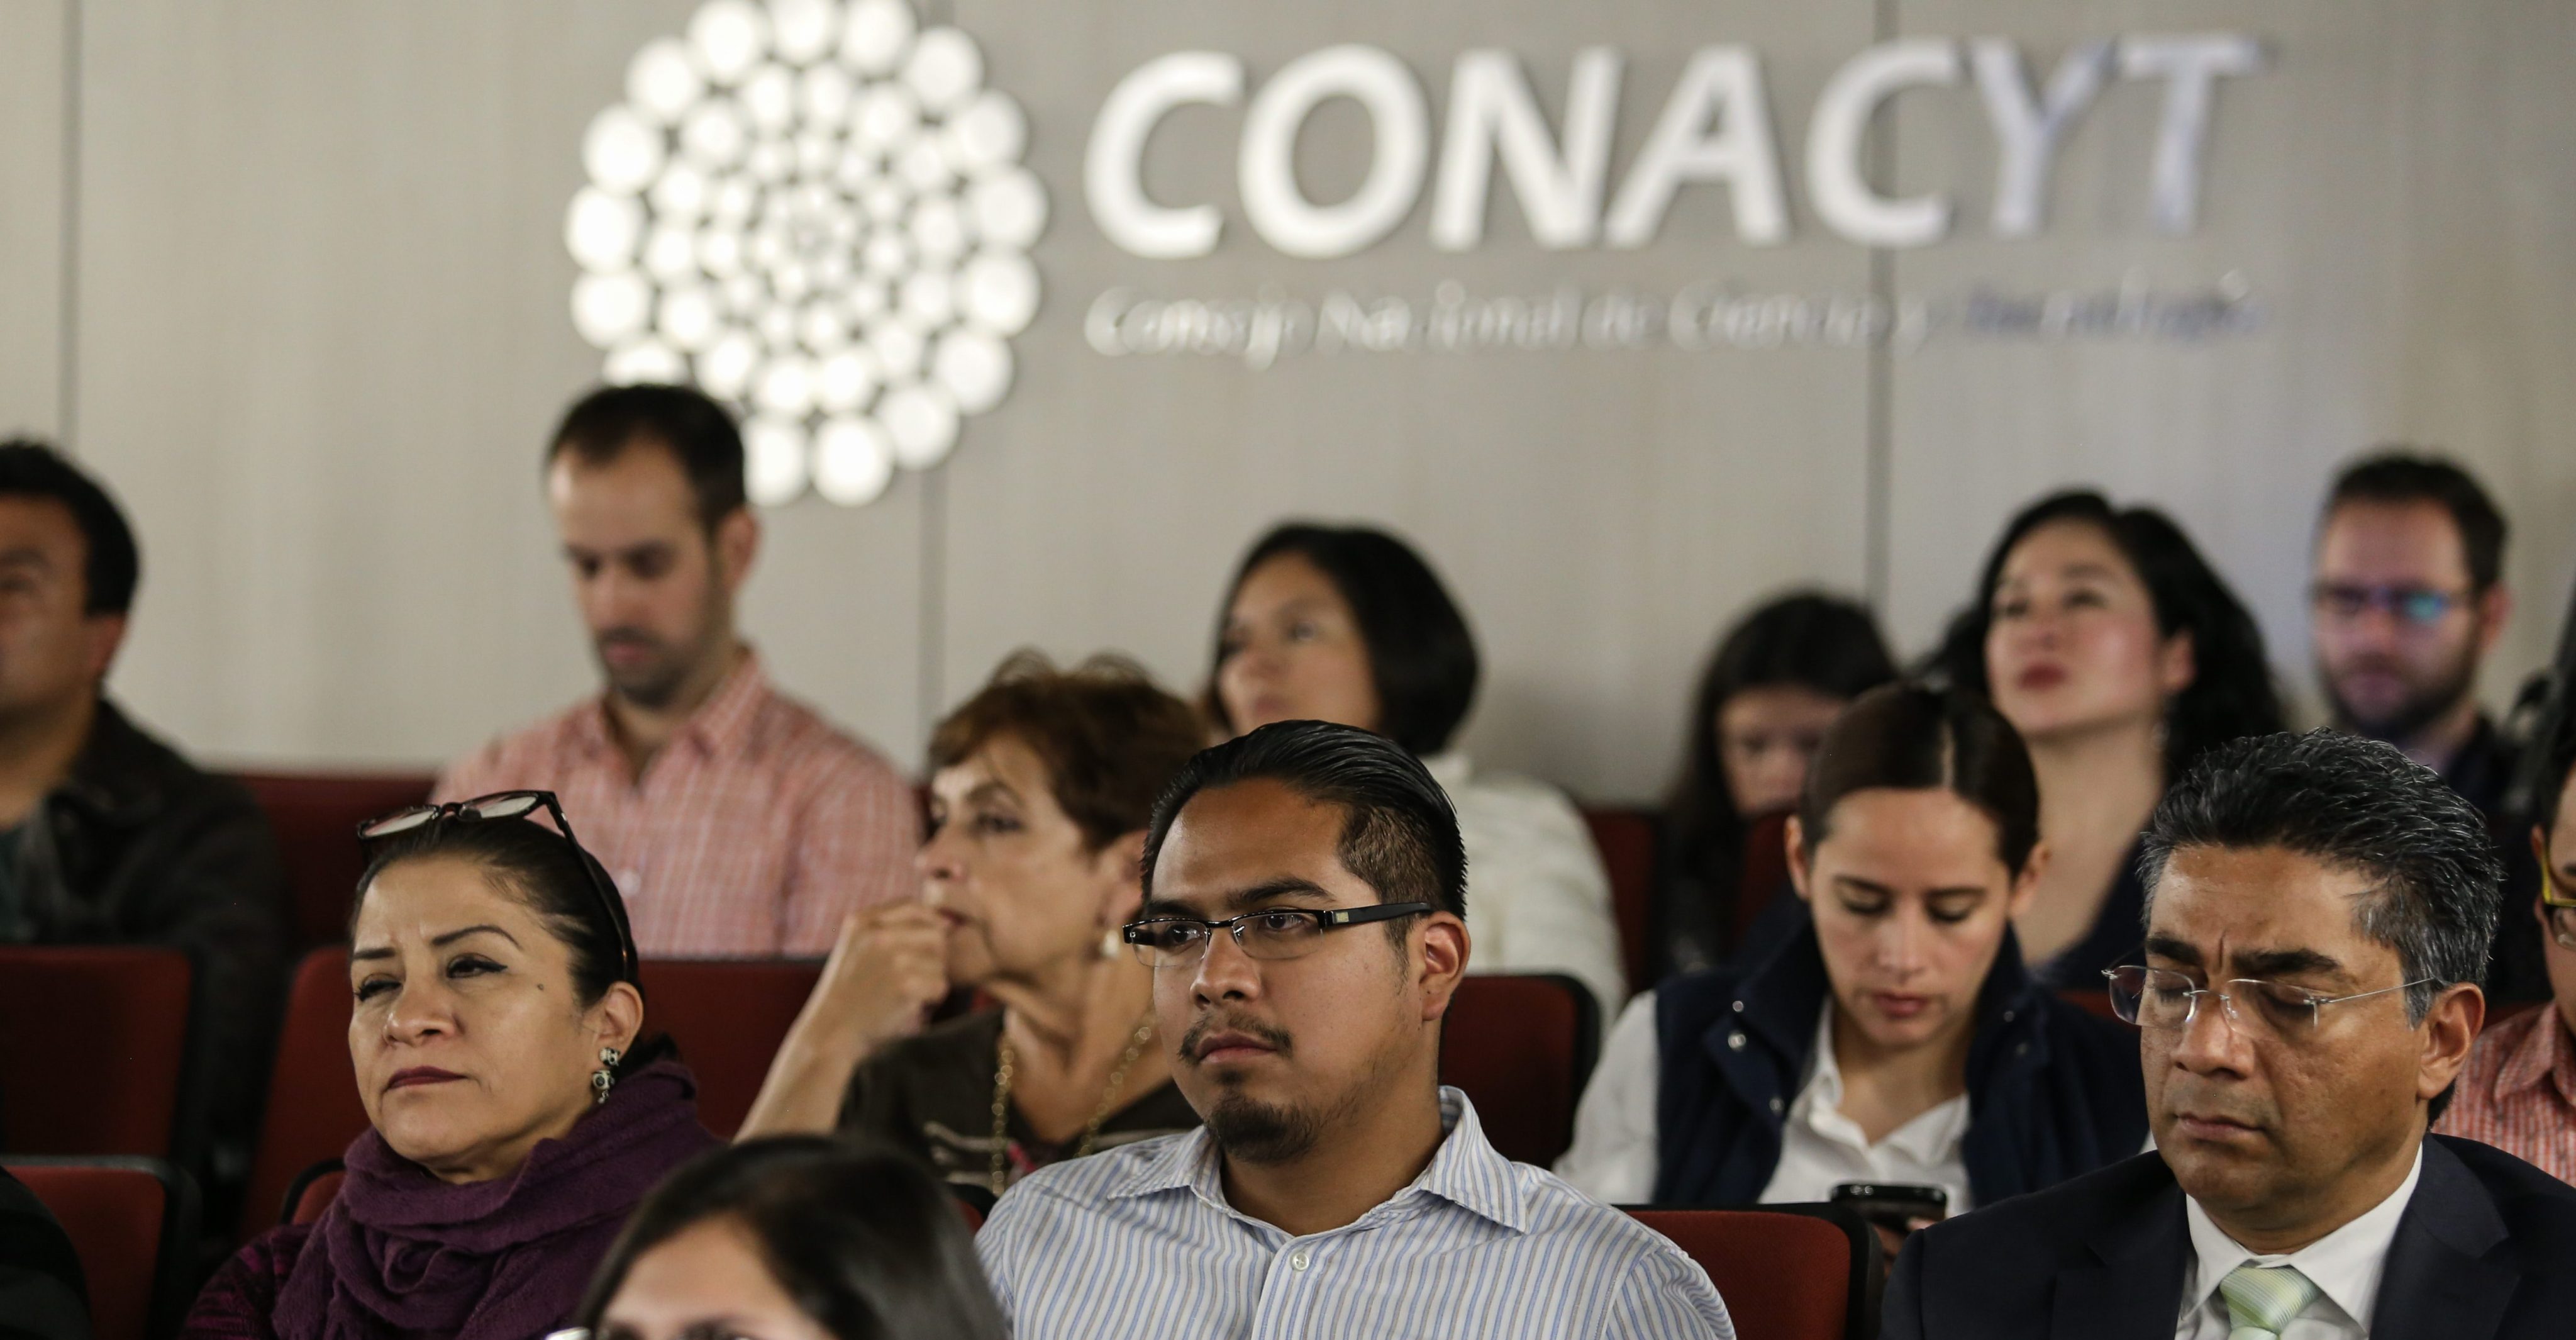 Conacyt will review scholarship applications rejected for mistakes on its site